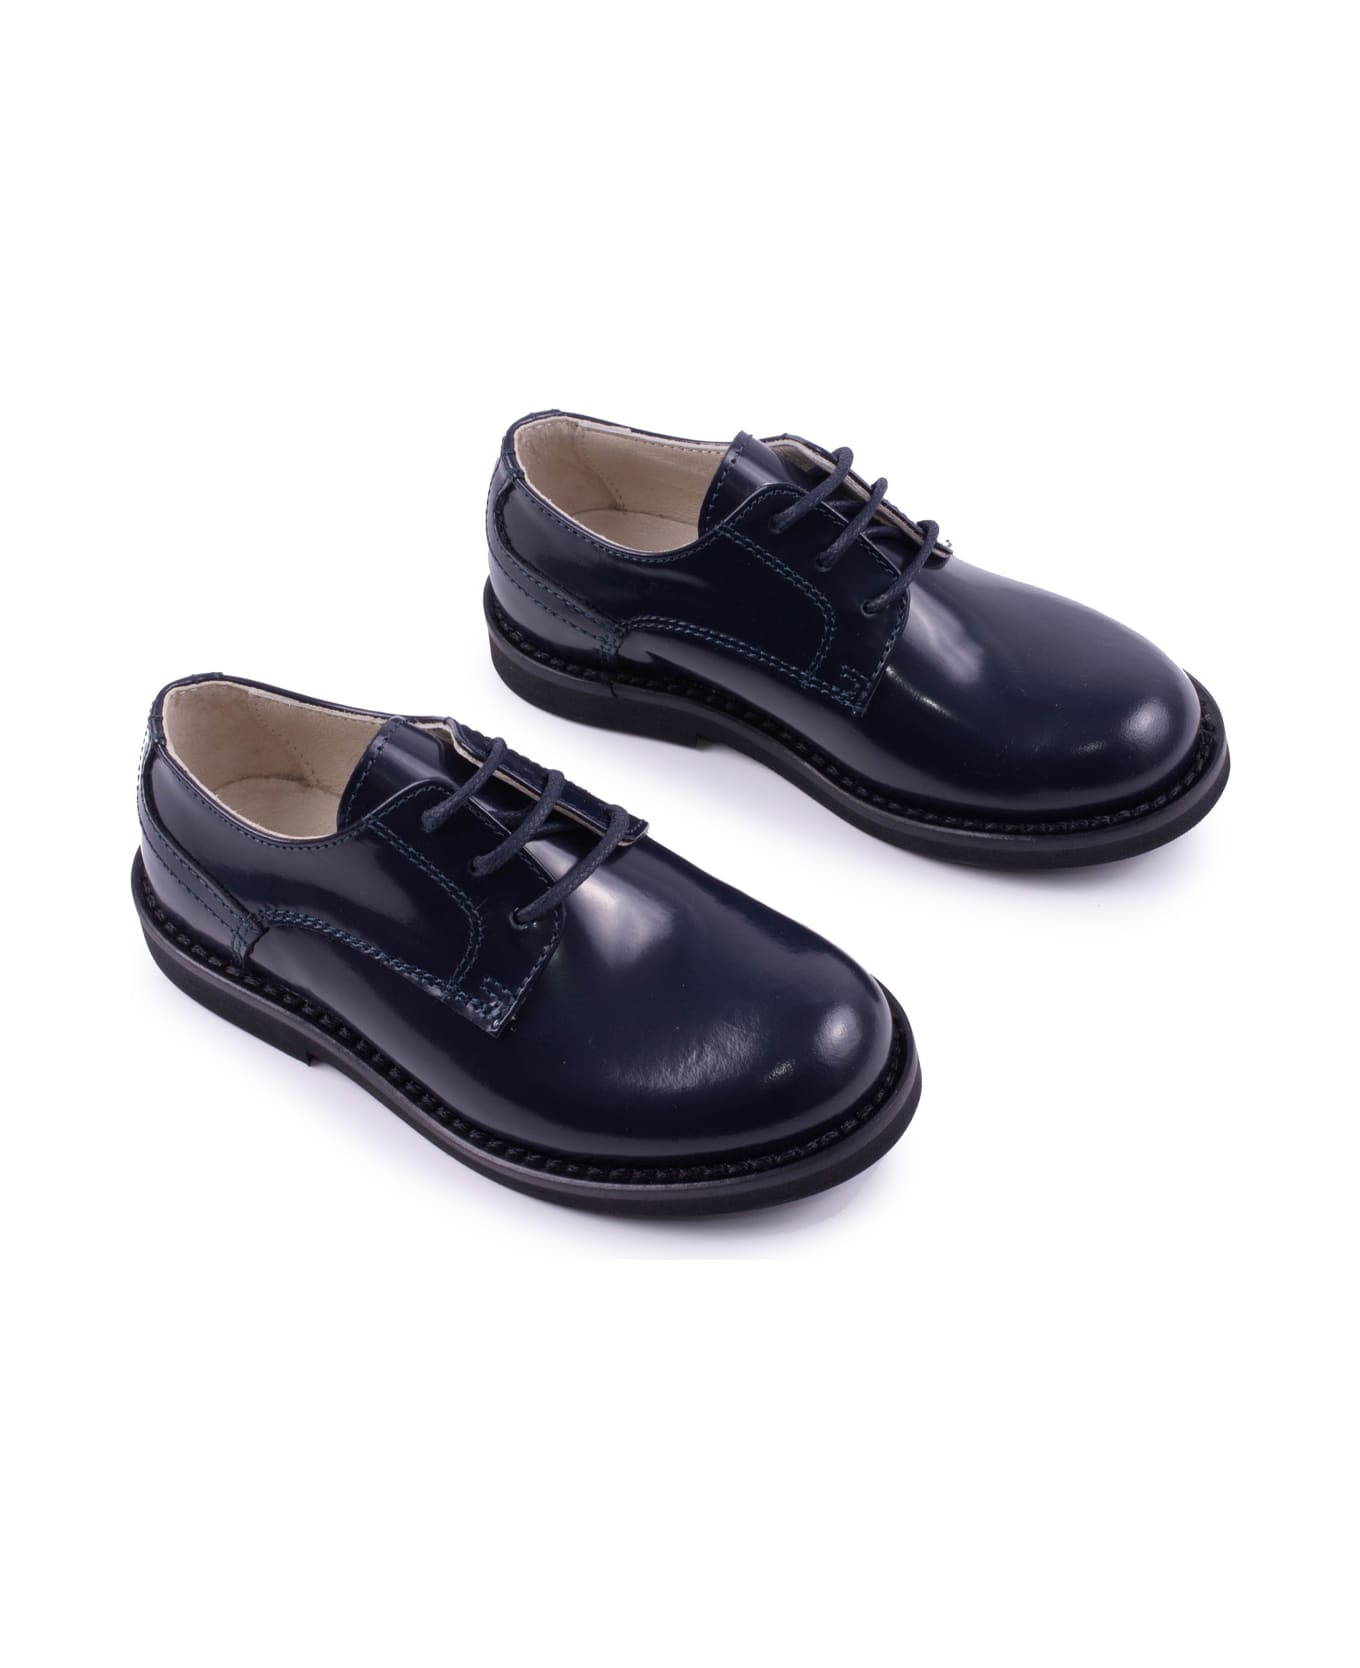 Andrea Montelpare Leather Shoes - Blue